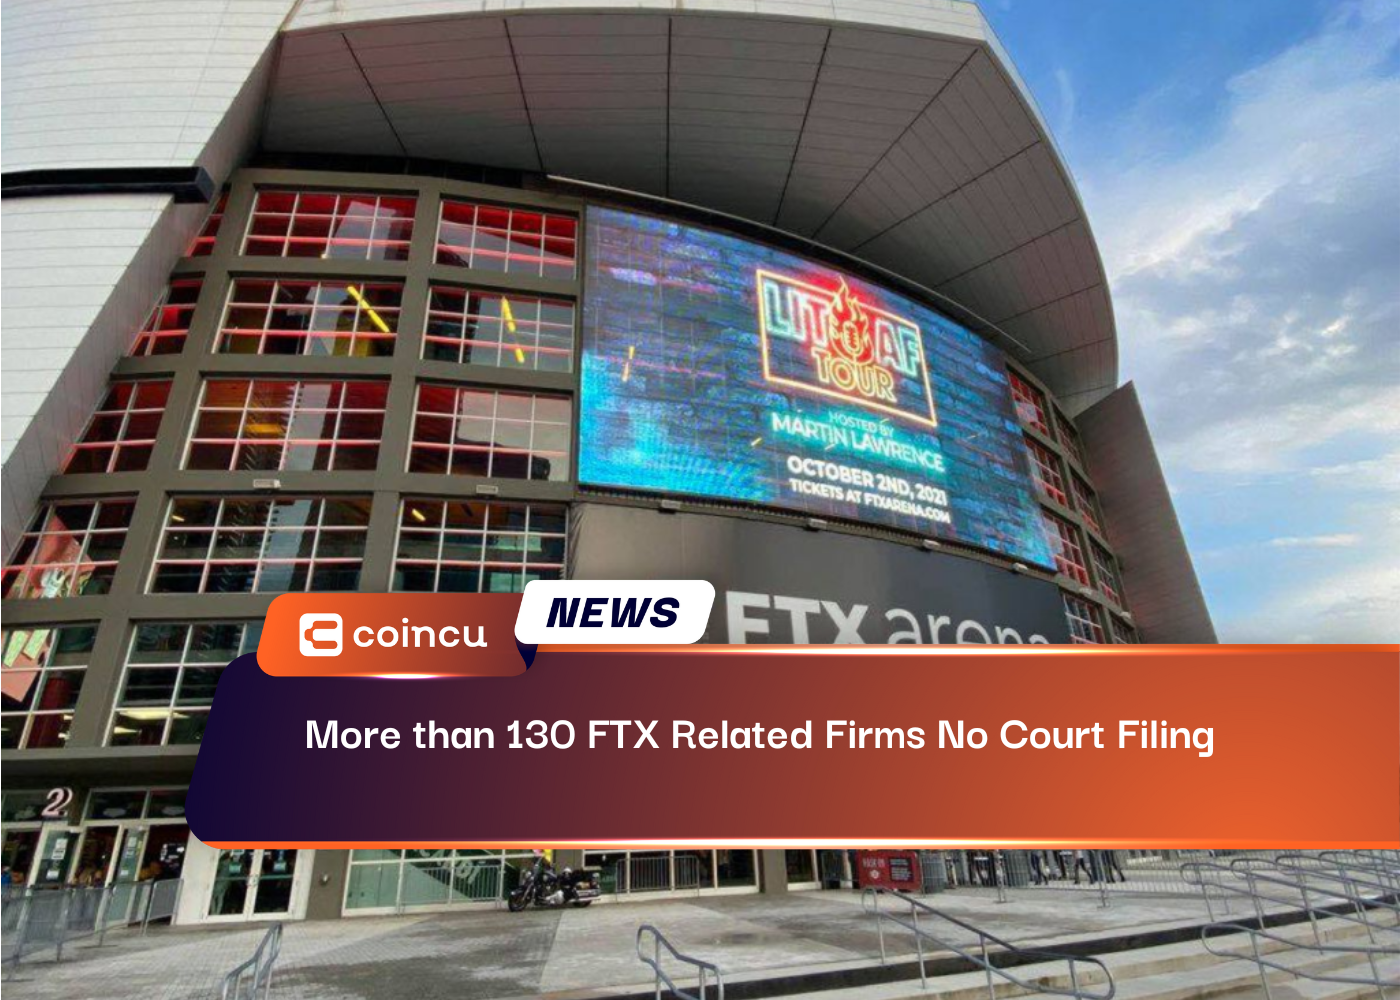 More than 130 FTX Related Firms No Court Filing